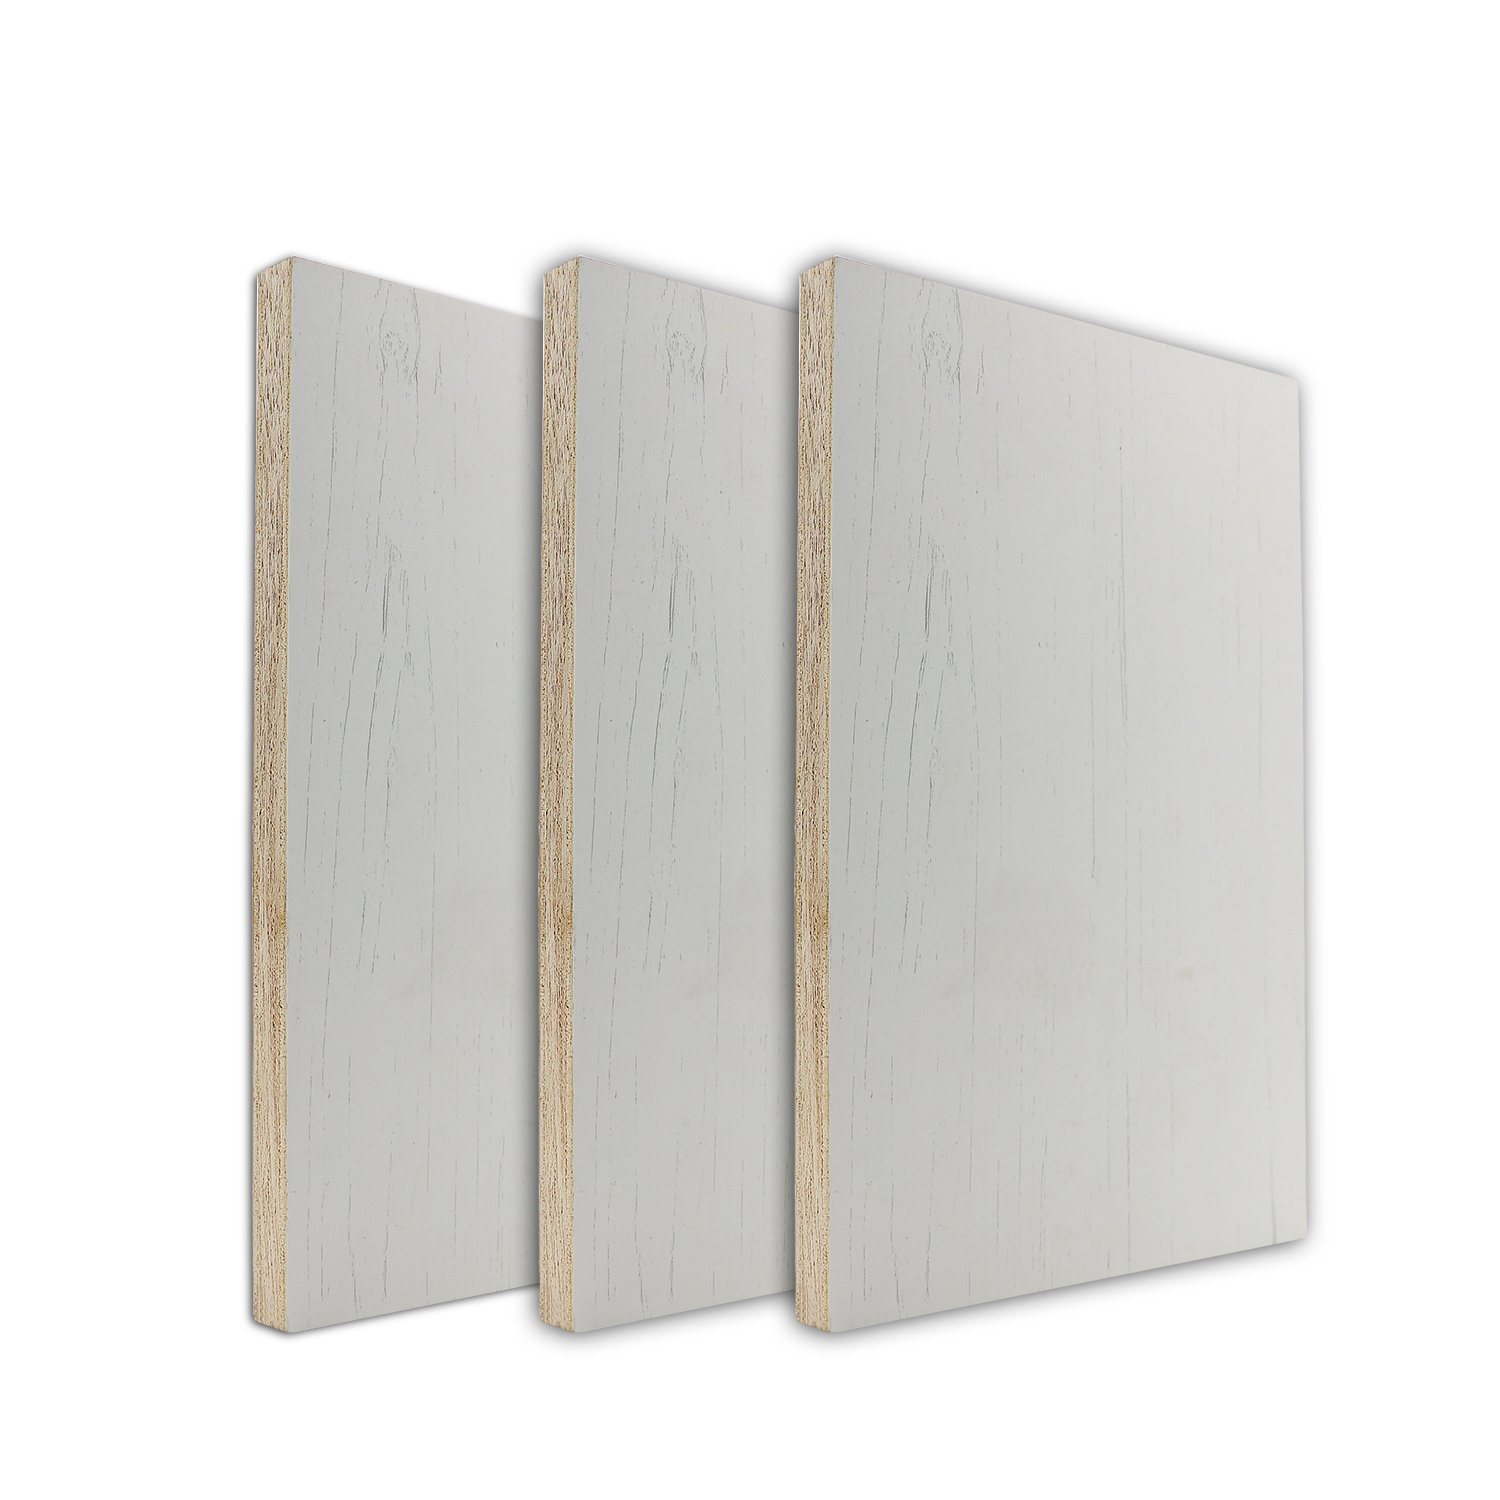 Melamine Particle Board Chipboard for Furniture